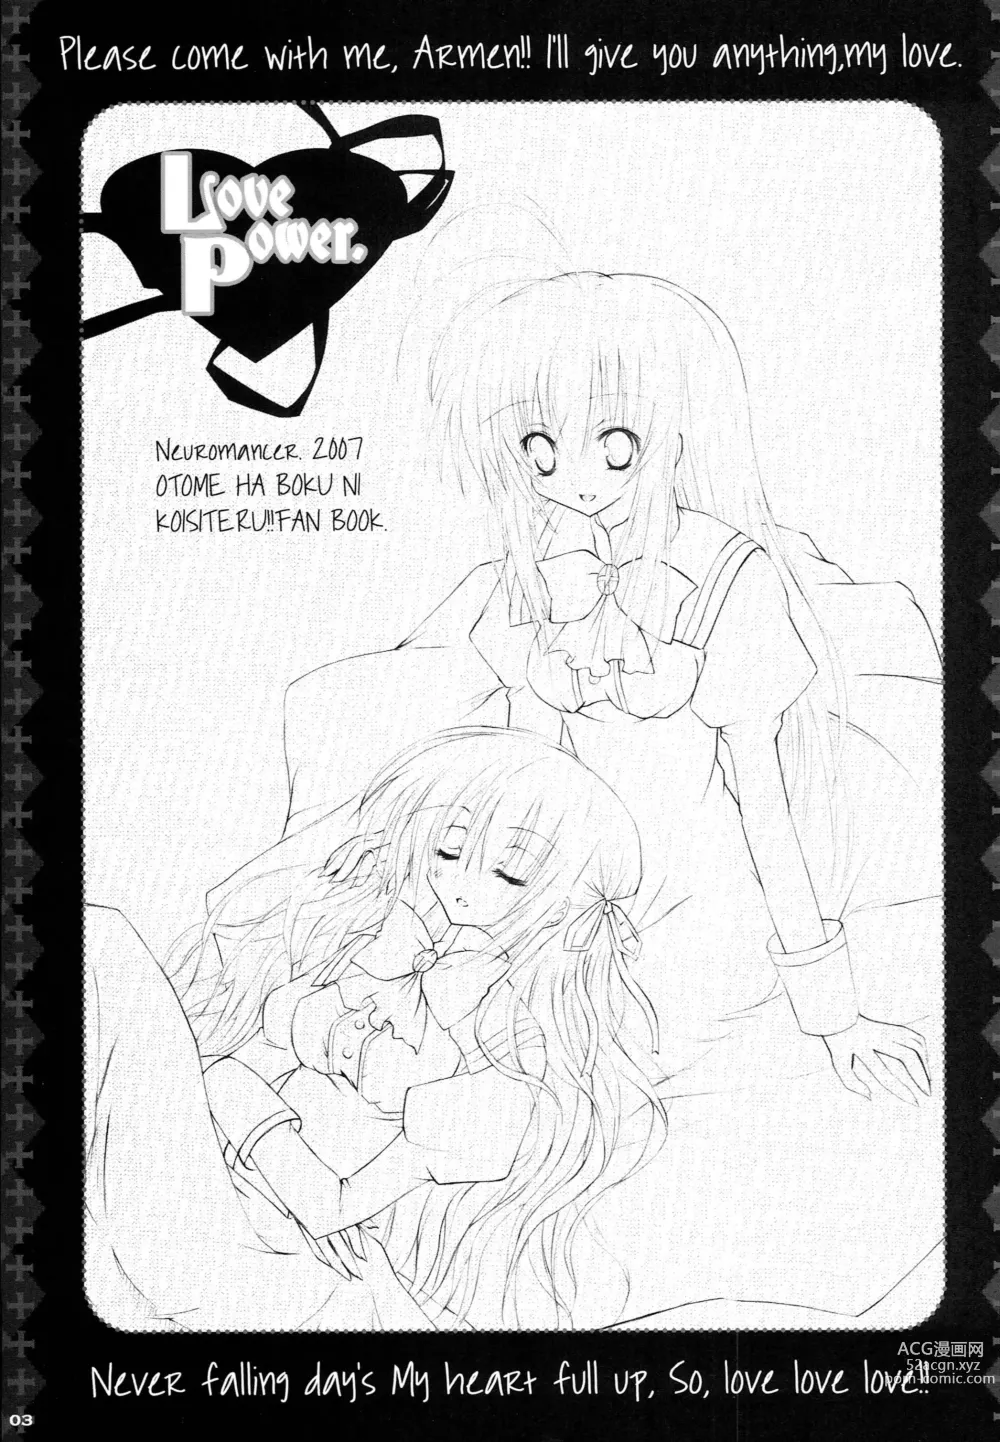 Page 2 of doujinshi Love Power.